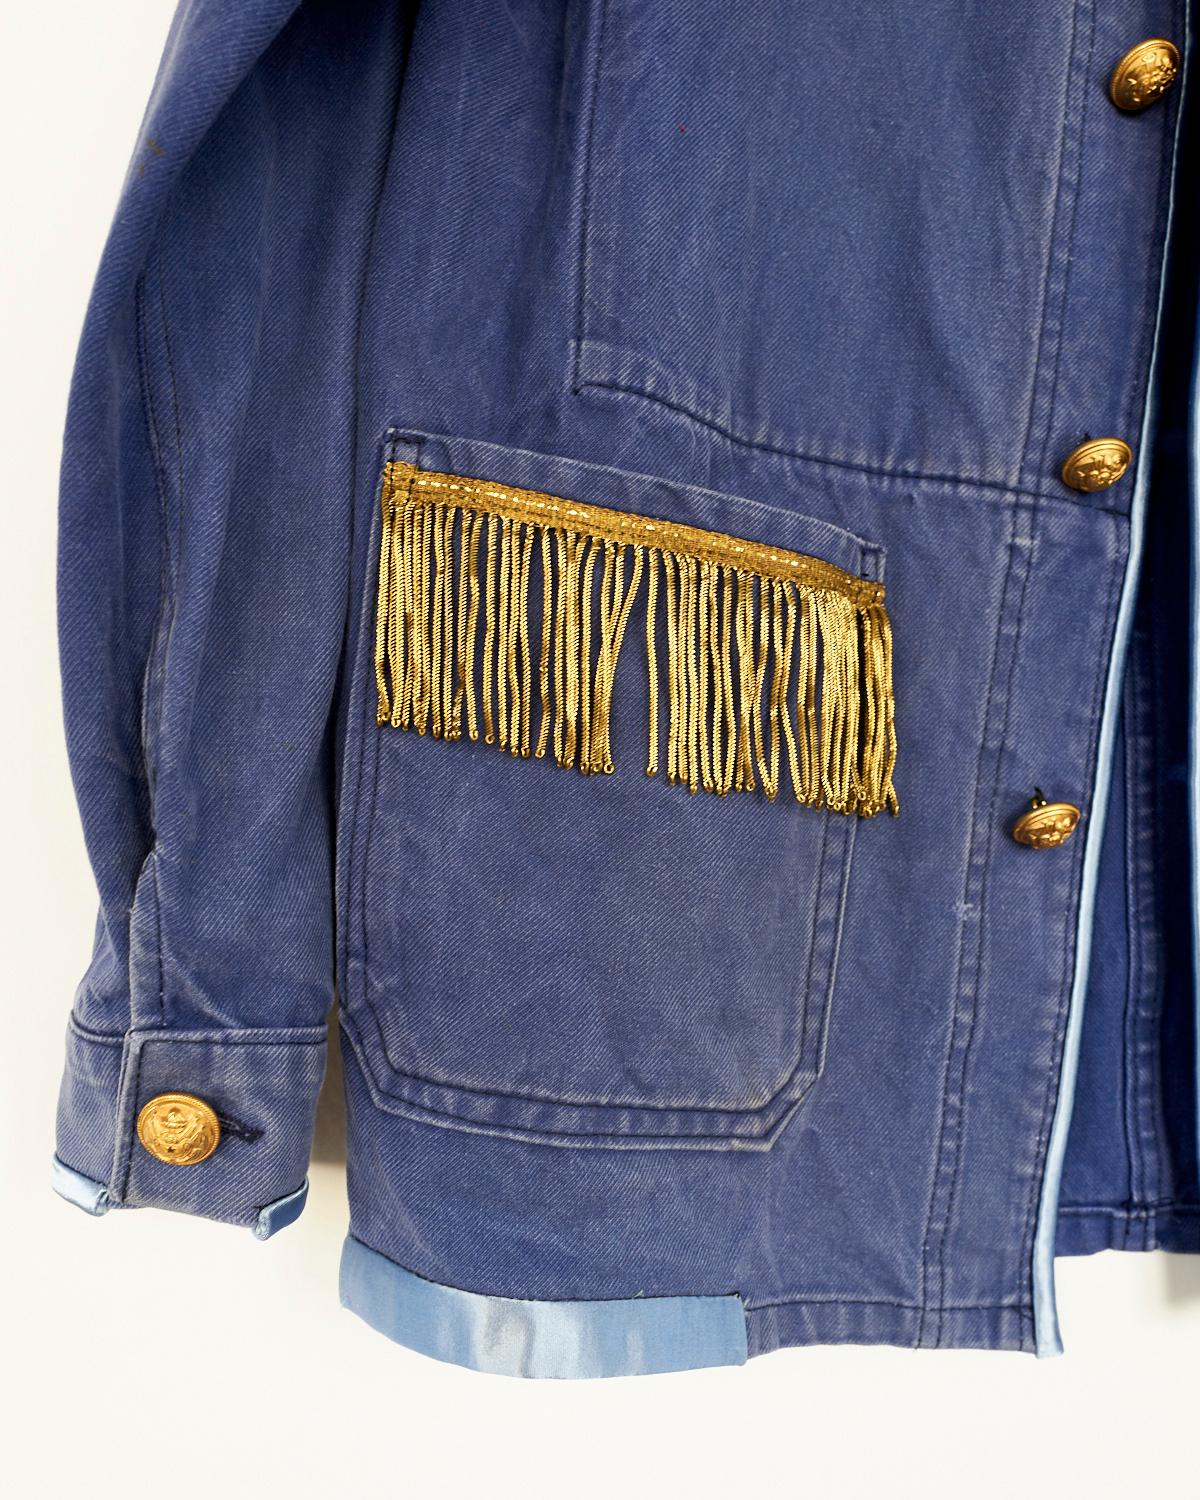 Embellished Oversize Gold Fringe Distressed French Blue Work Jacket Cotton 
Brand: J Dauphin
Size: S/M
Sustainable Luxury, Collectible Vintage Upcycled Re-purposed

Our one of a kind, zero waste, up-cycled jackets are made from vintage, natural